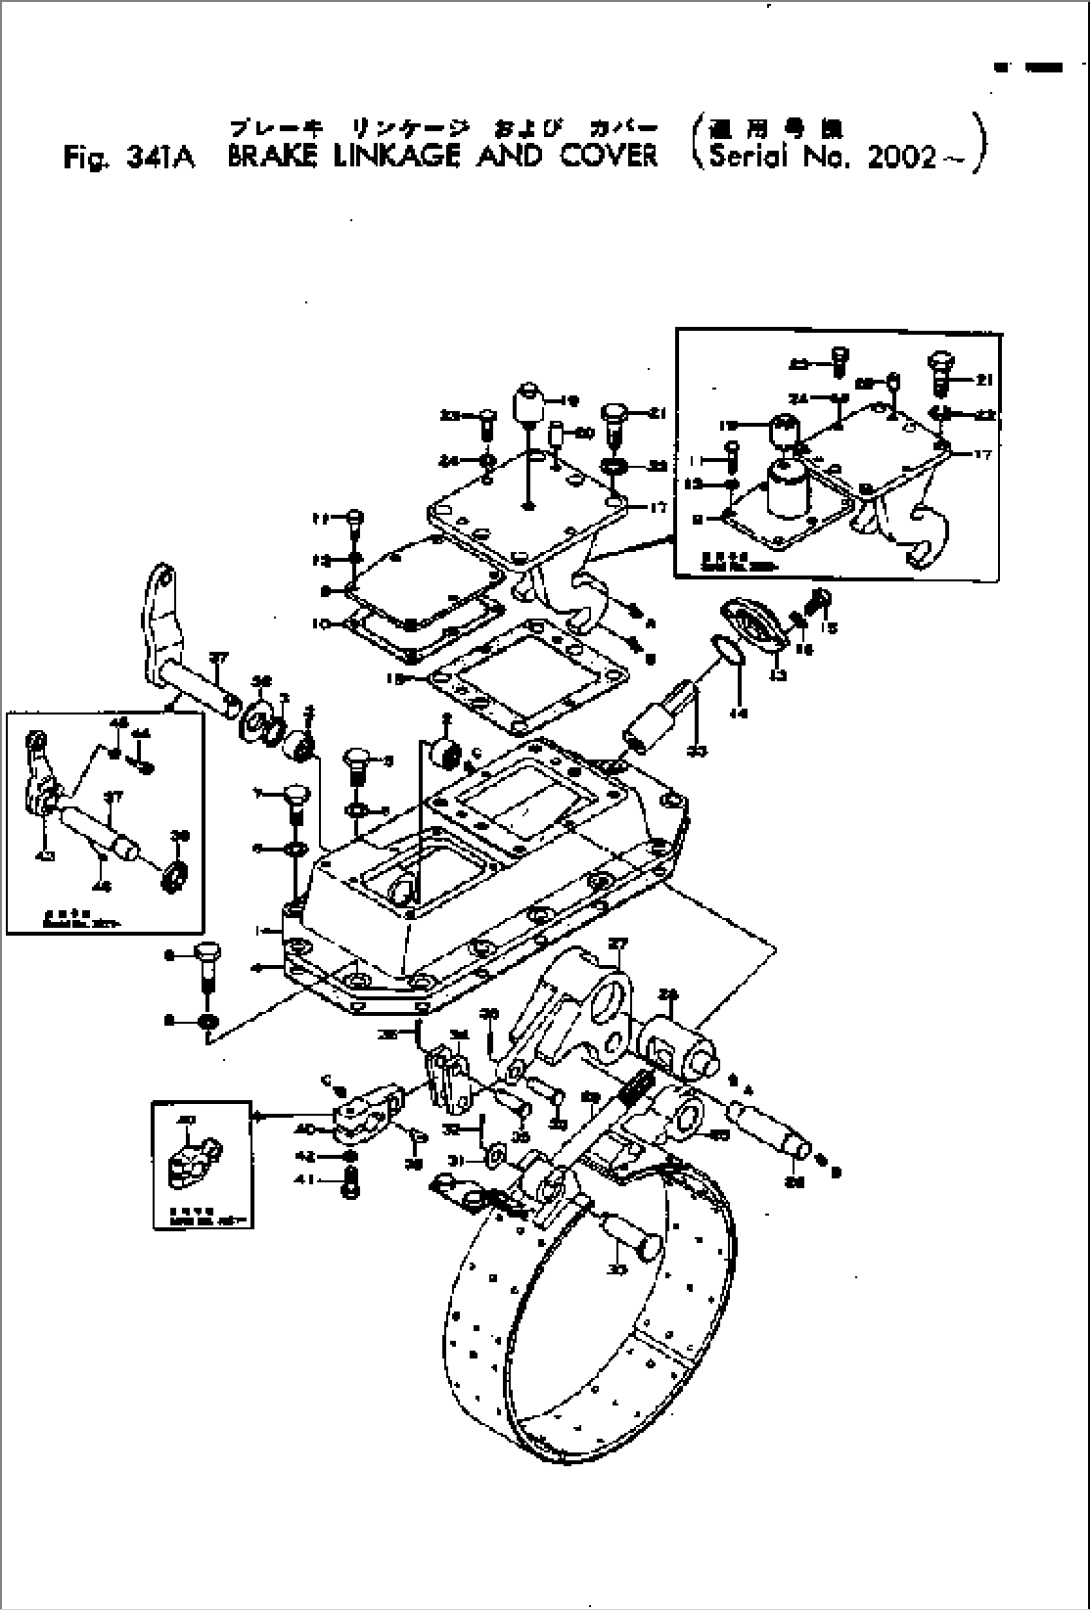 BRAKE LINKAGE AND COVER(#2002-)